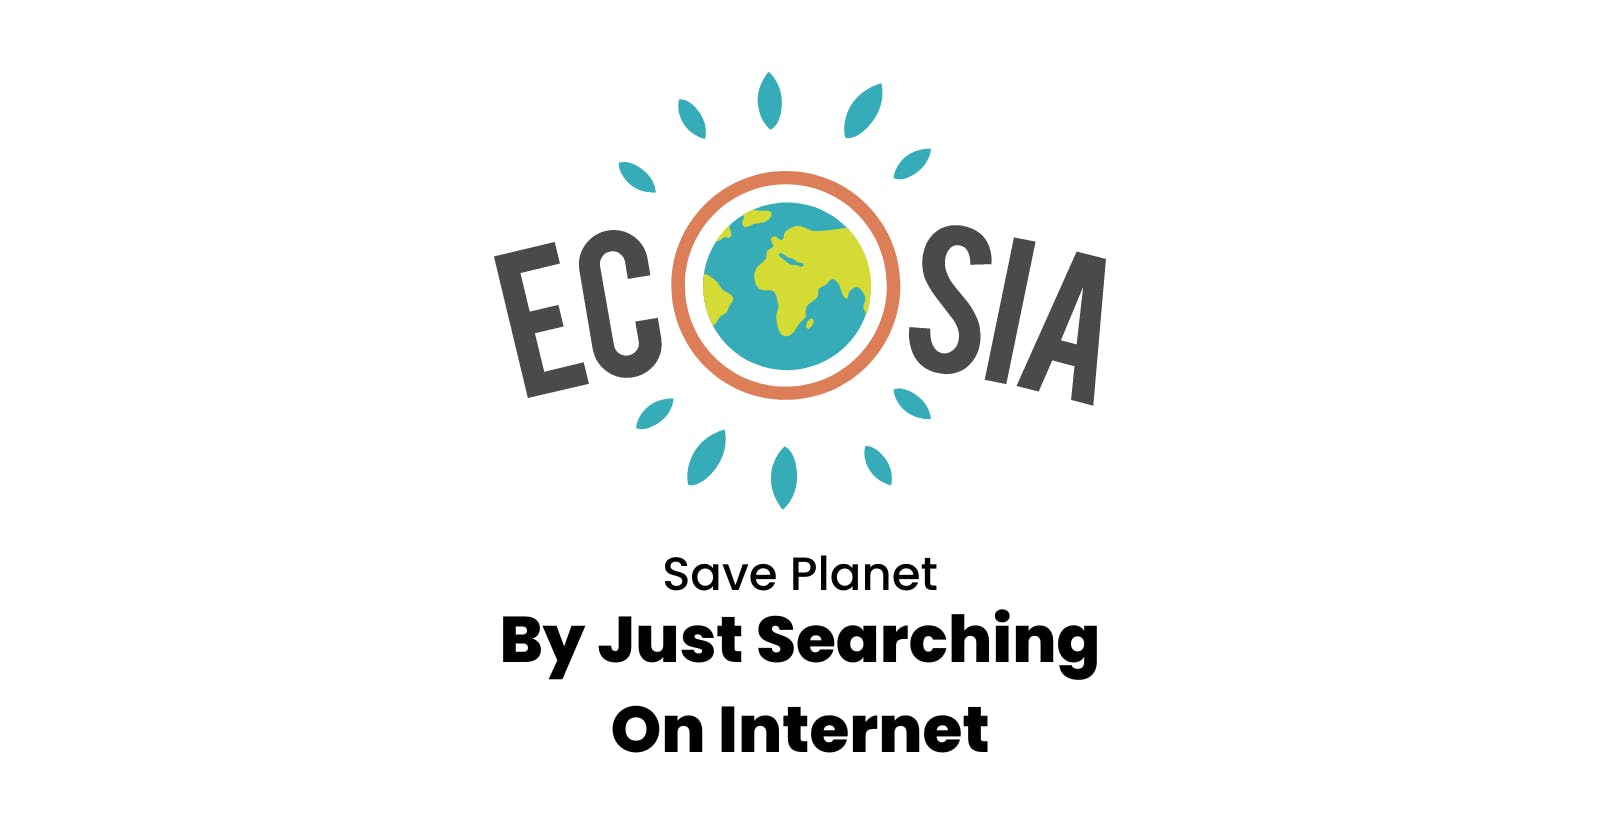 Plant Trees While Browsing with Ecosia Search Engine